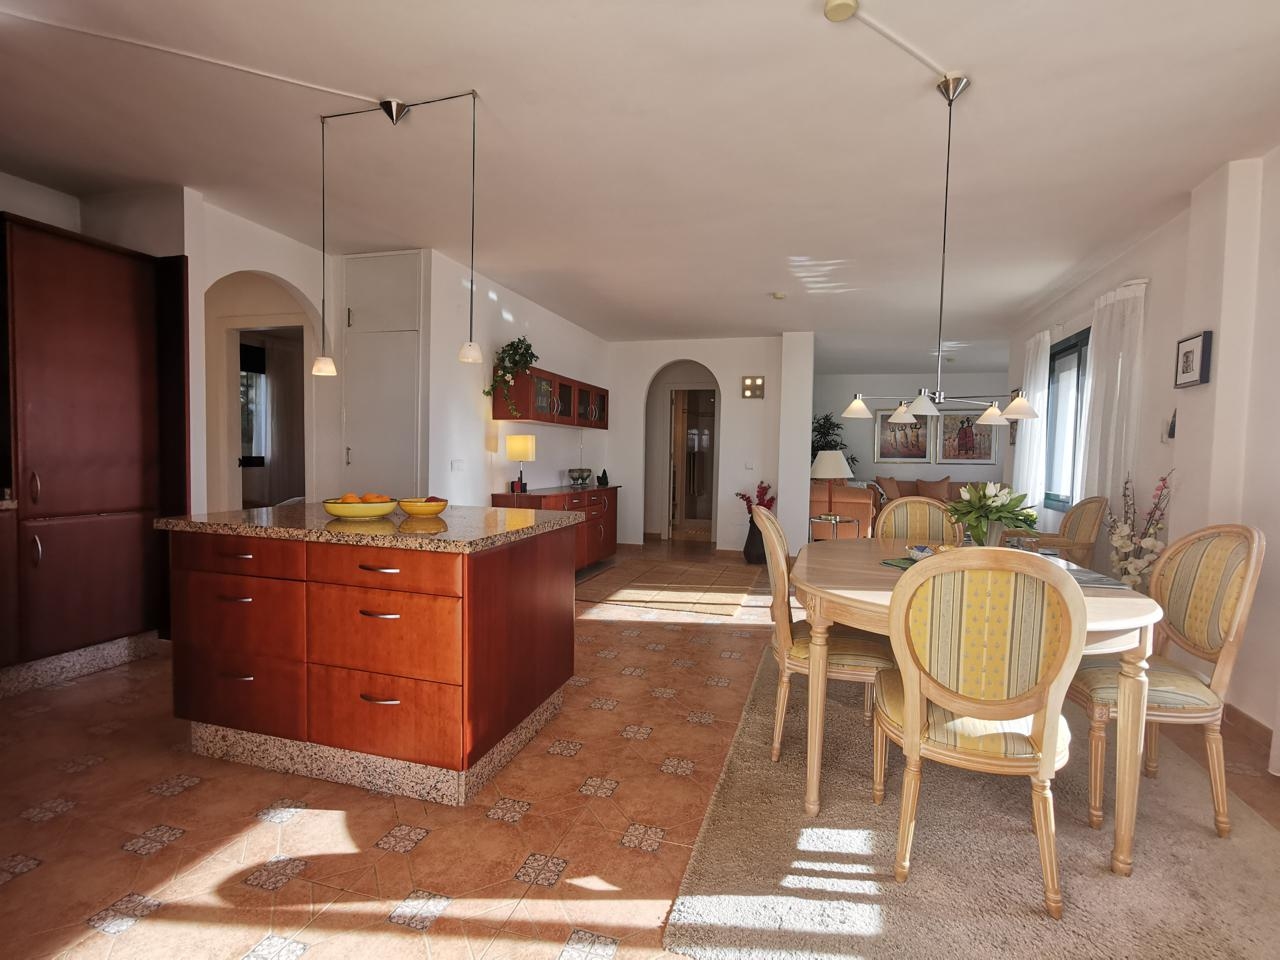 Penthouse for sale in Benalmádena Costa